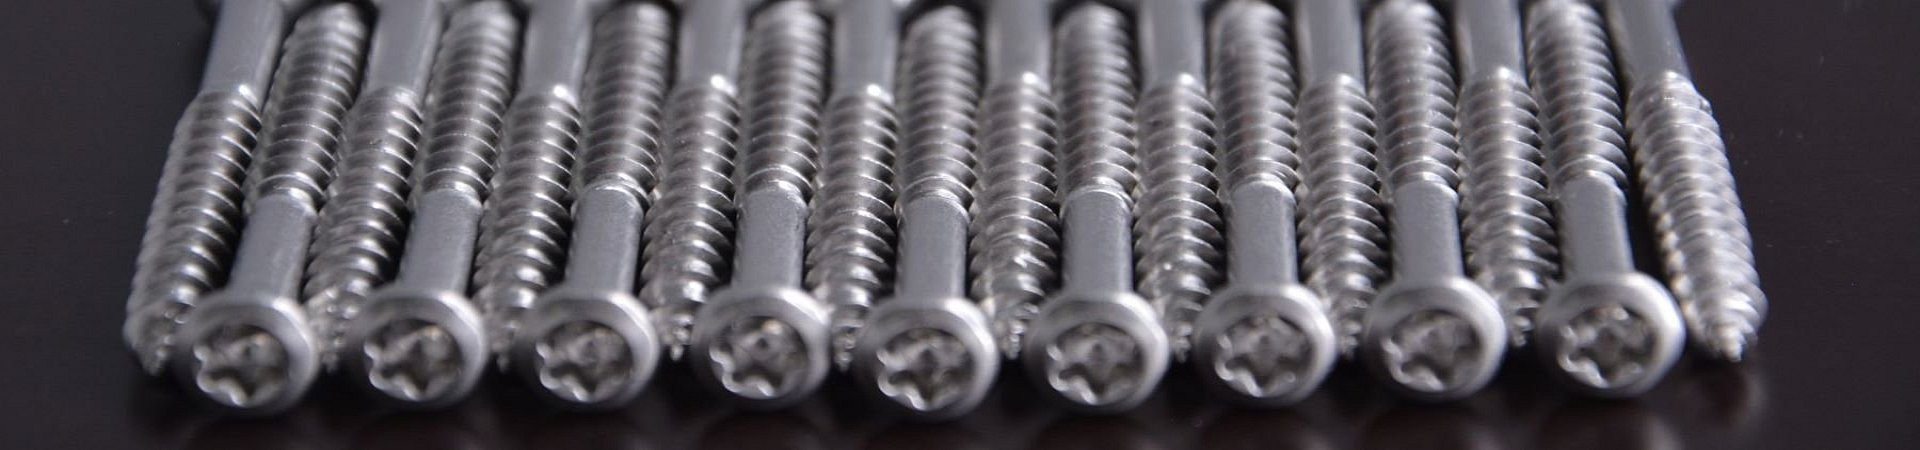 Fasteners for decking